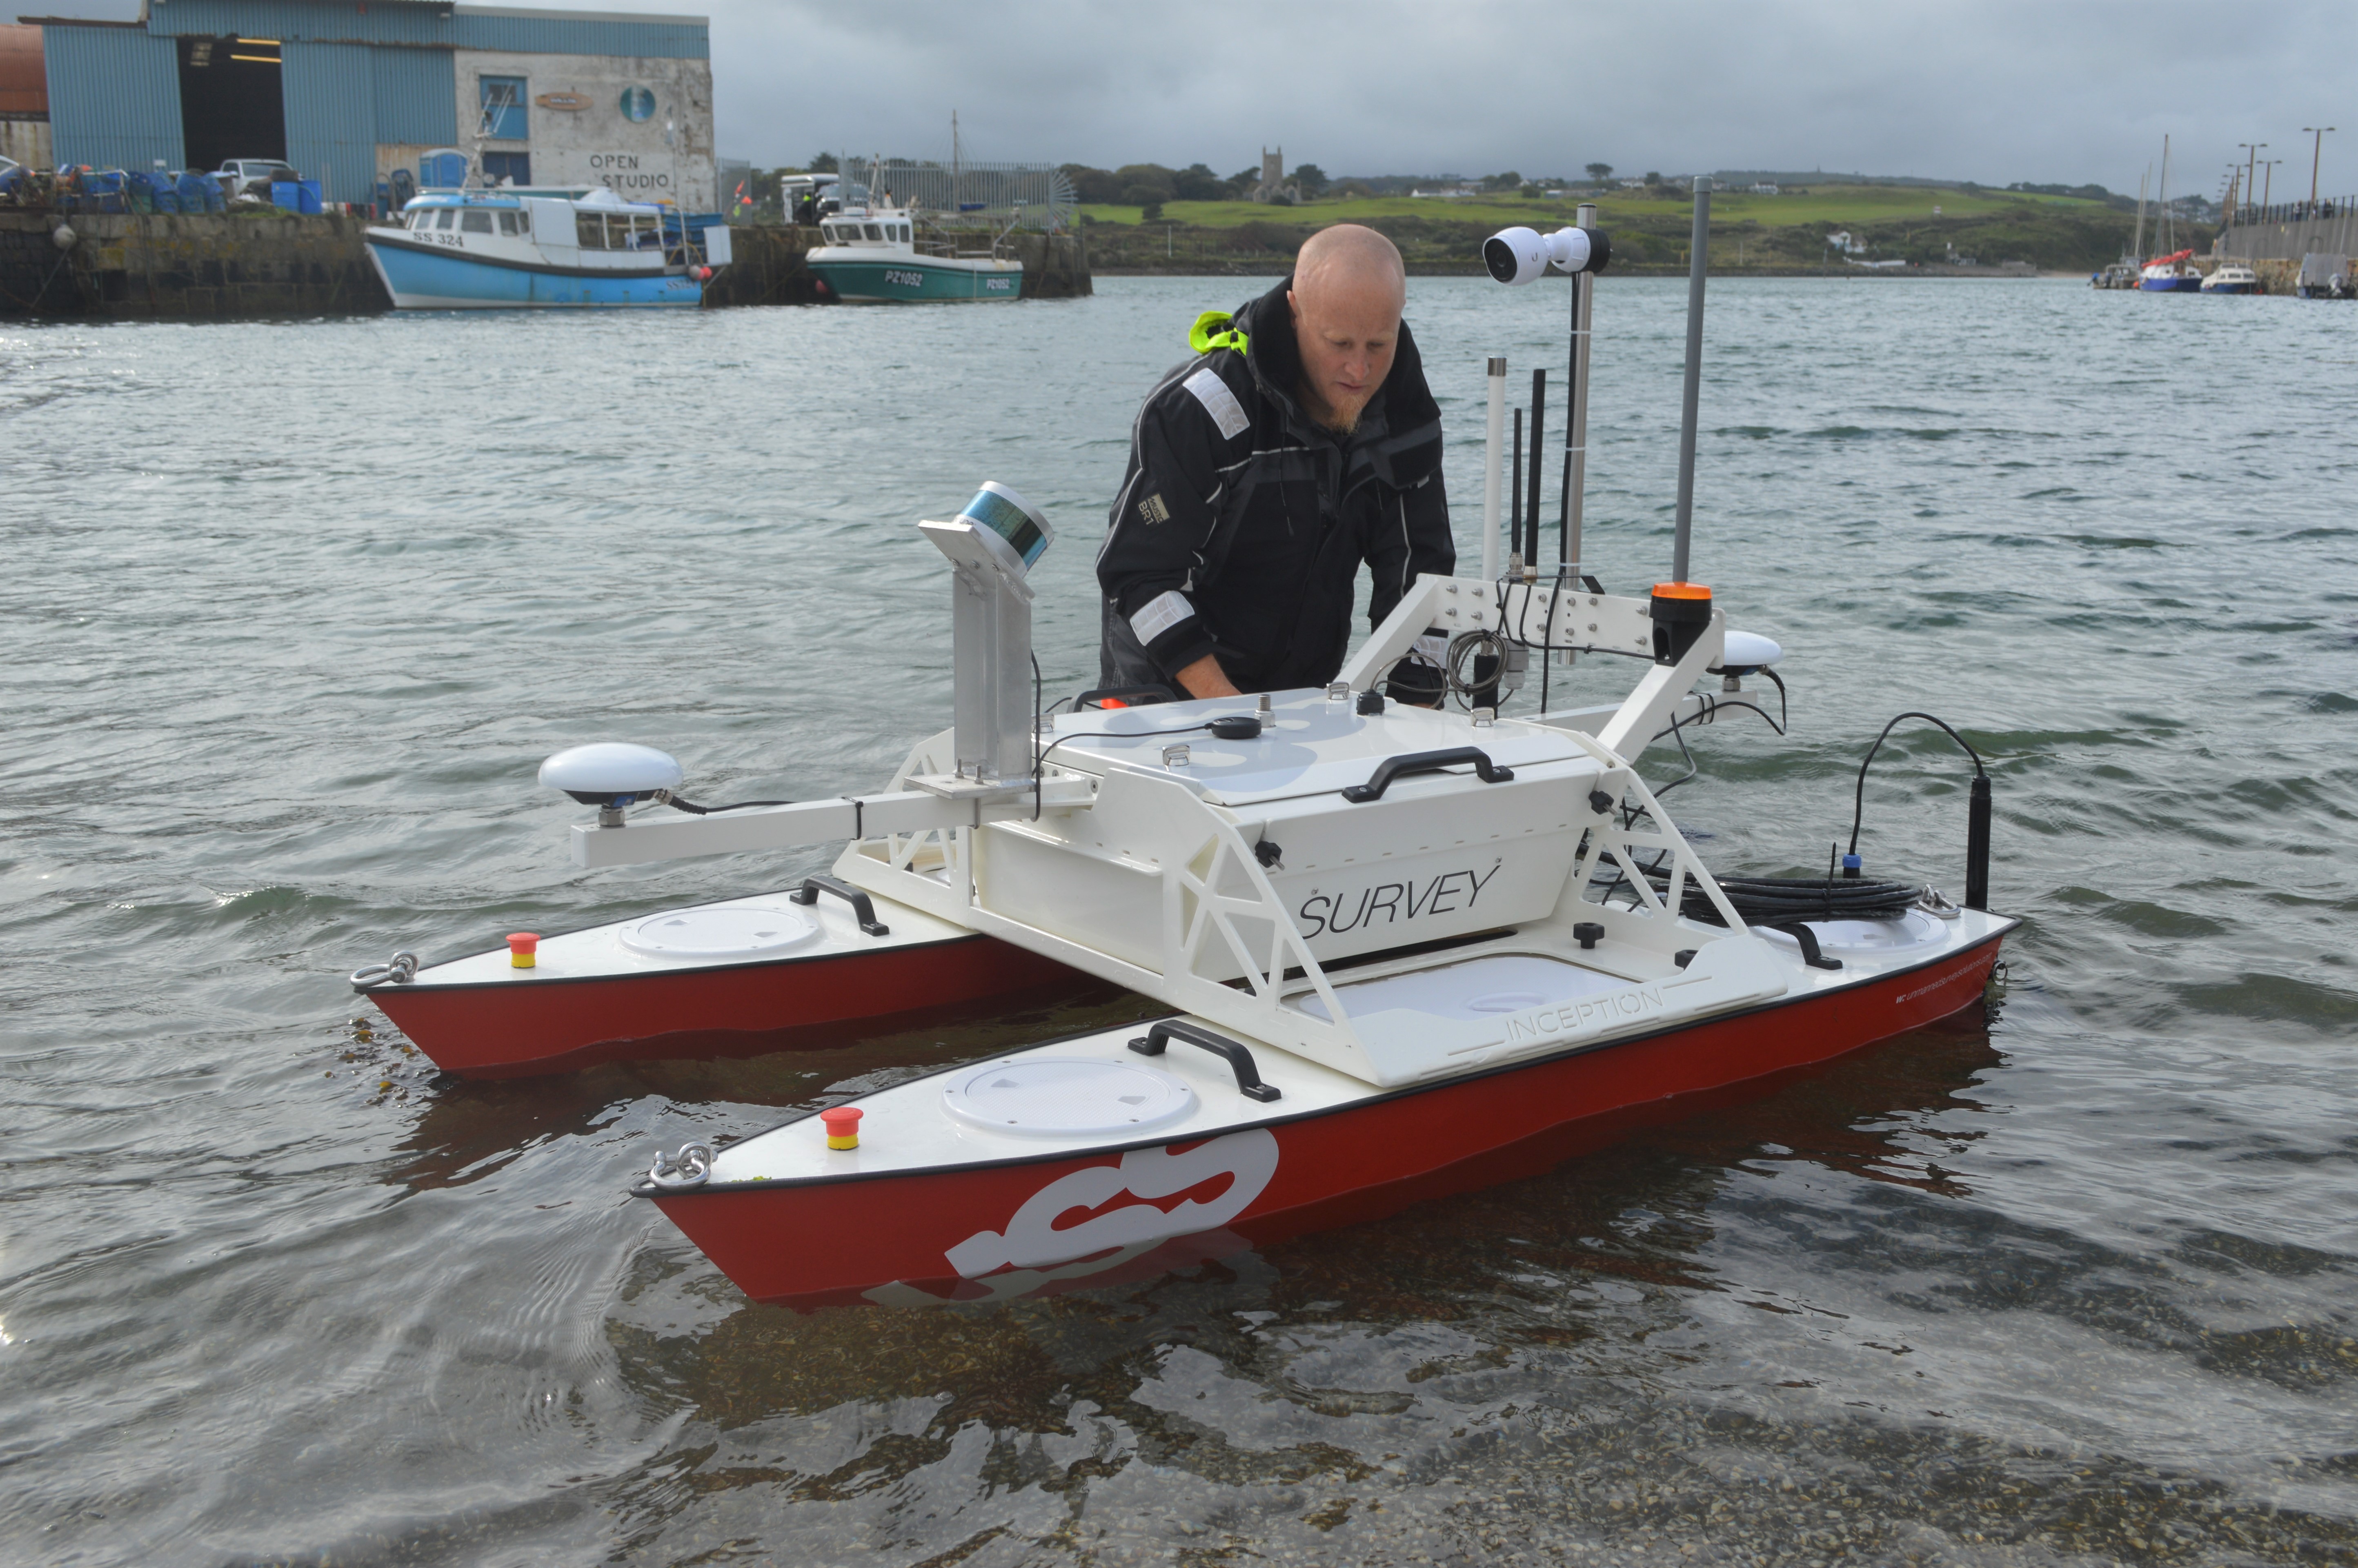 Inception Class USV being deployed in Hayle Harbour